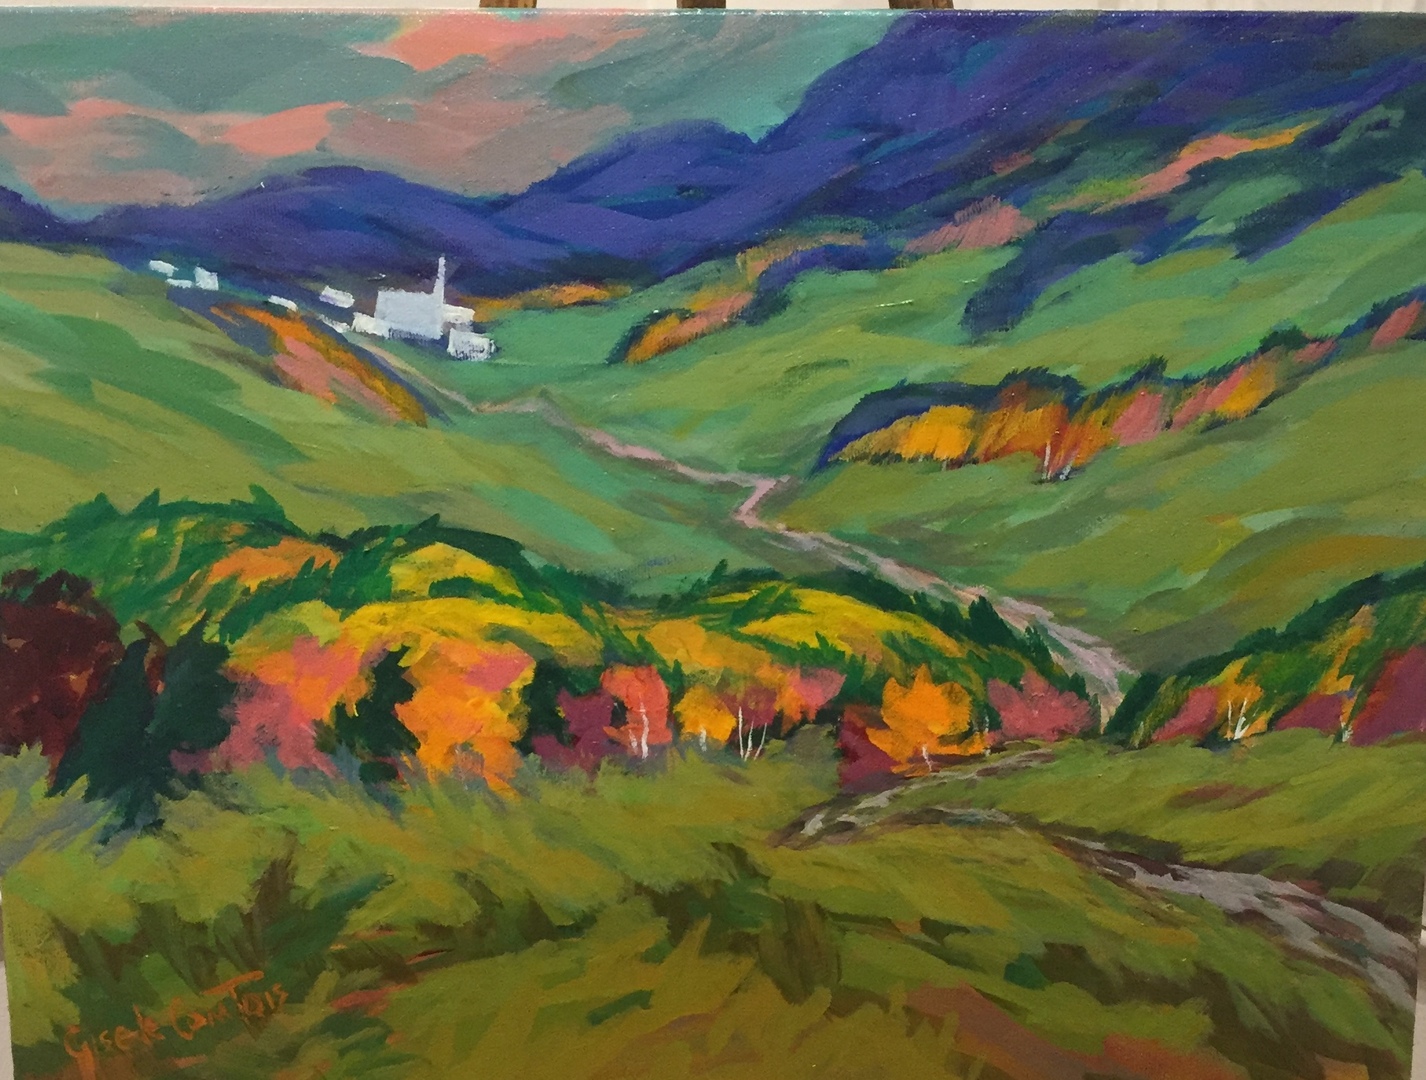 Iron Hill - 12 x 16 inches wide - $1850